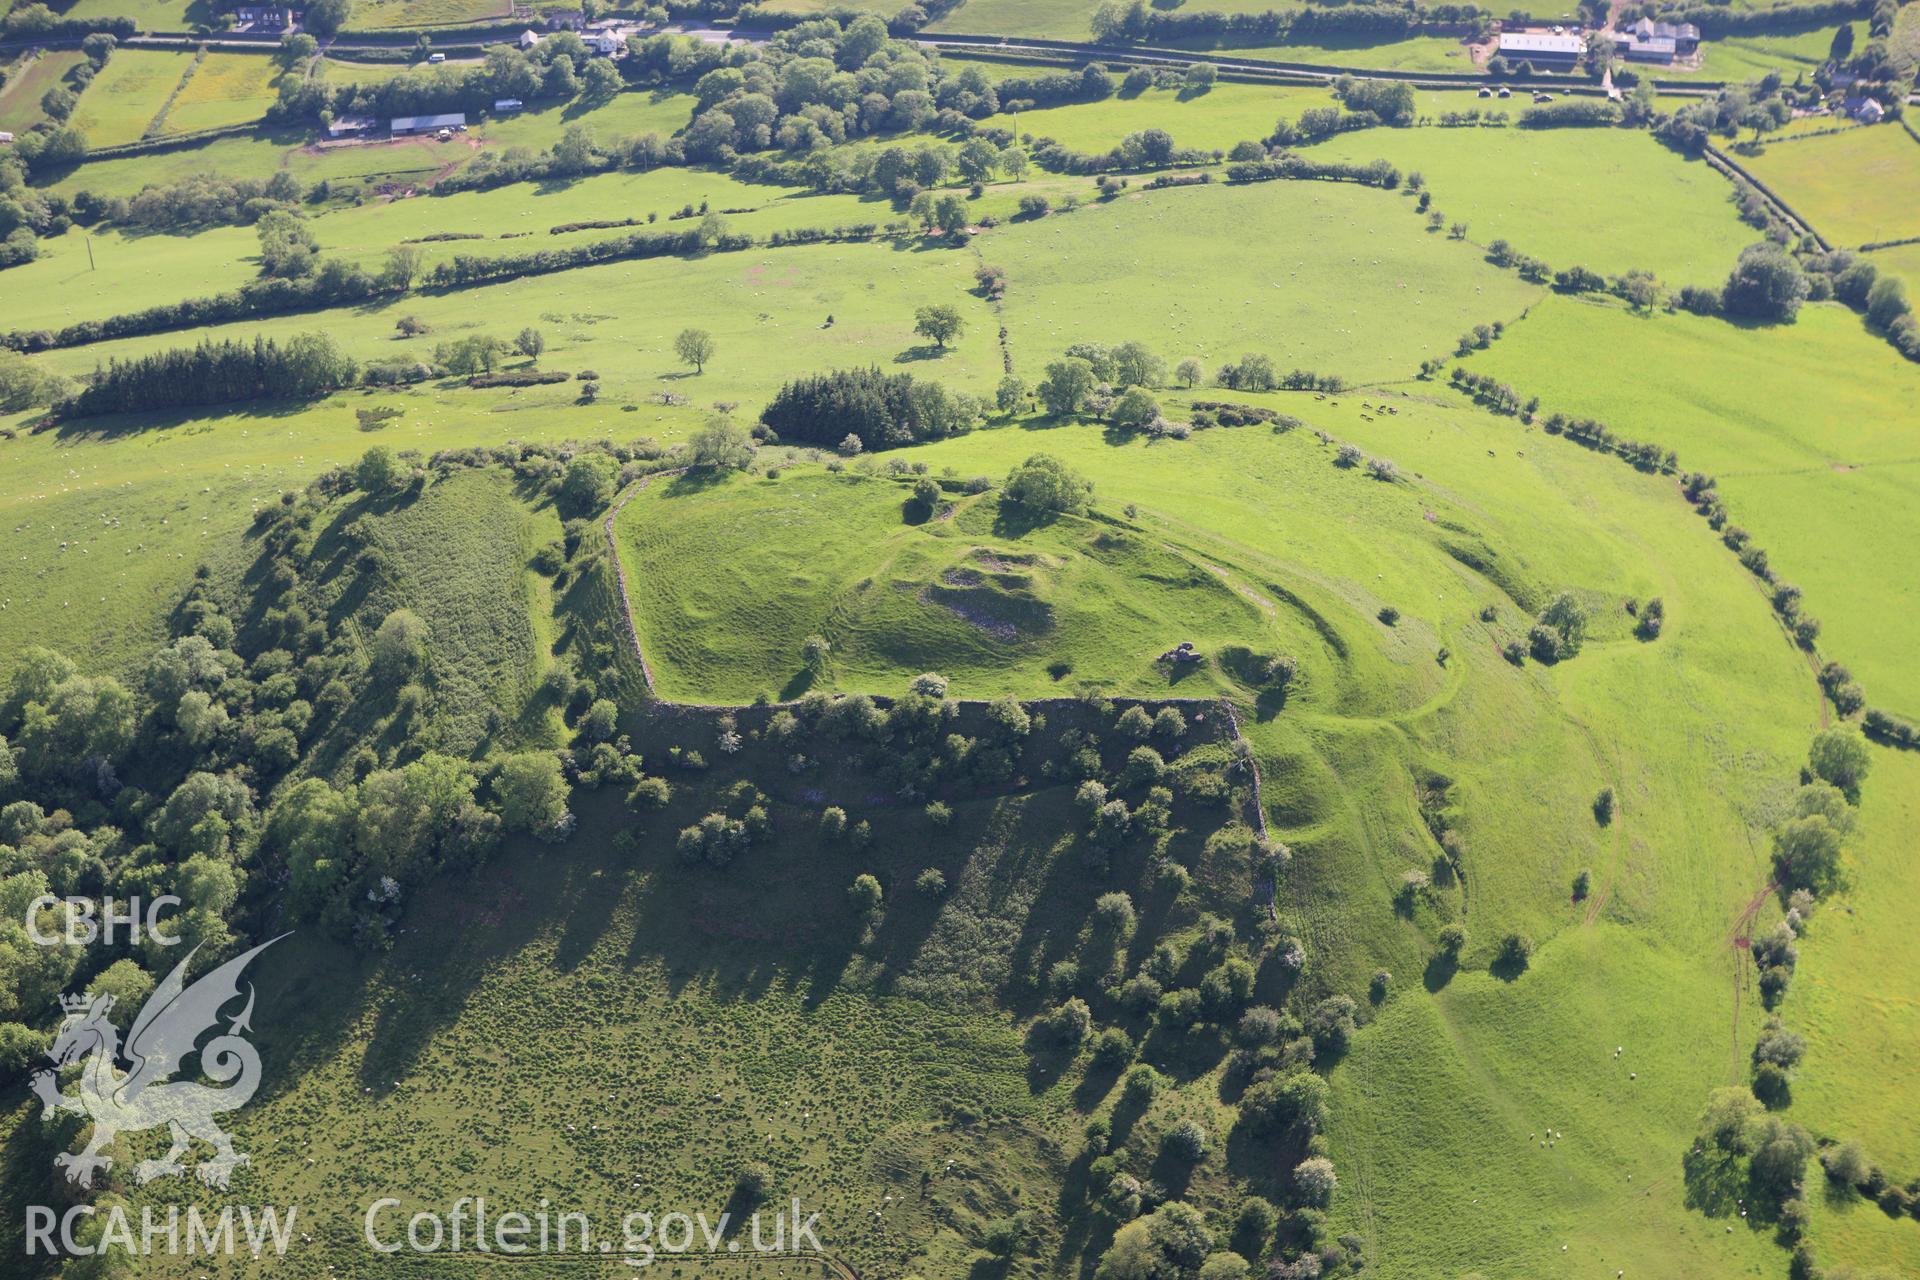 RCAHMW colour oblique aerial photograph of Castell Dinas. Taken on 11 June 2009 by Toby Driver